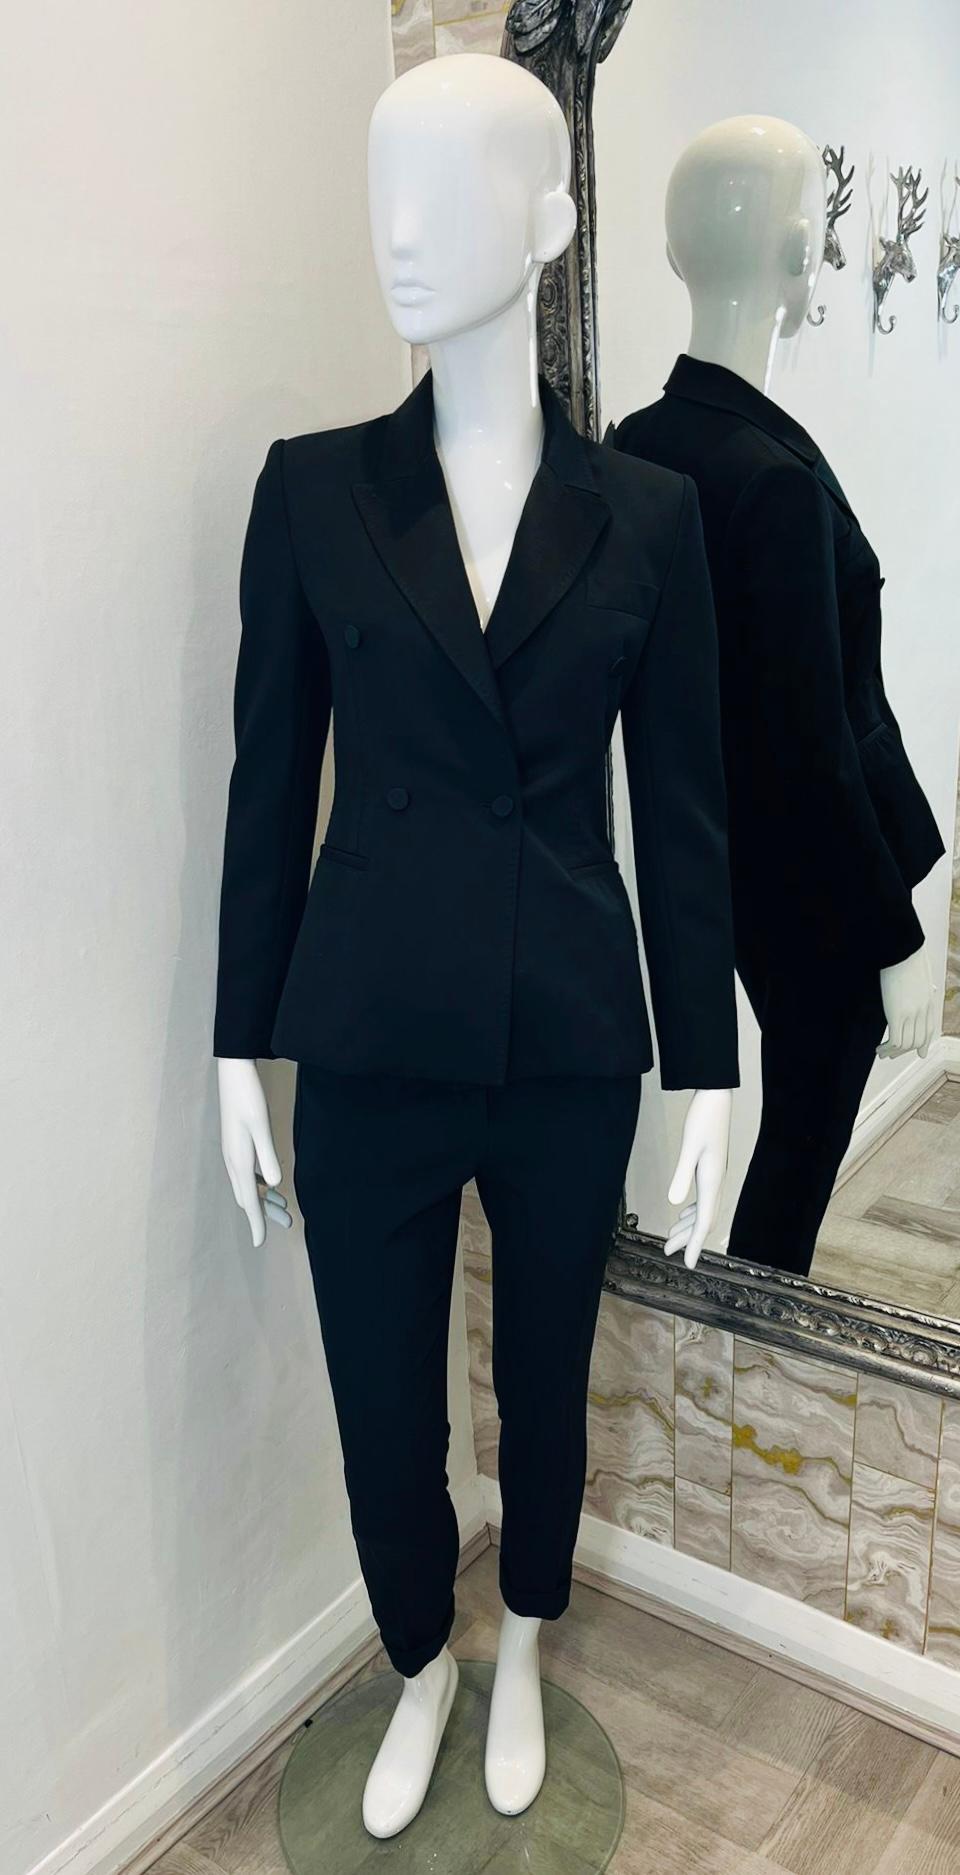 Tom Ford Tailored Two-Piece Suit

Black suit consisting of double-breasted jacket and slim fit trousers.

Fitted blazer designed with satin notched lapels, buttoned cuffs and three welt pockets.

Slightly cropped trousers detailed with satin strap